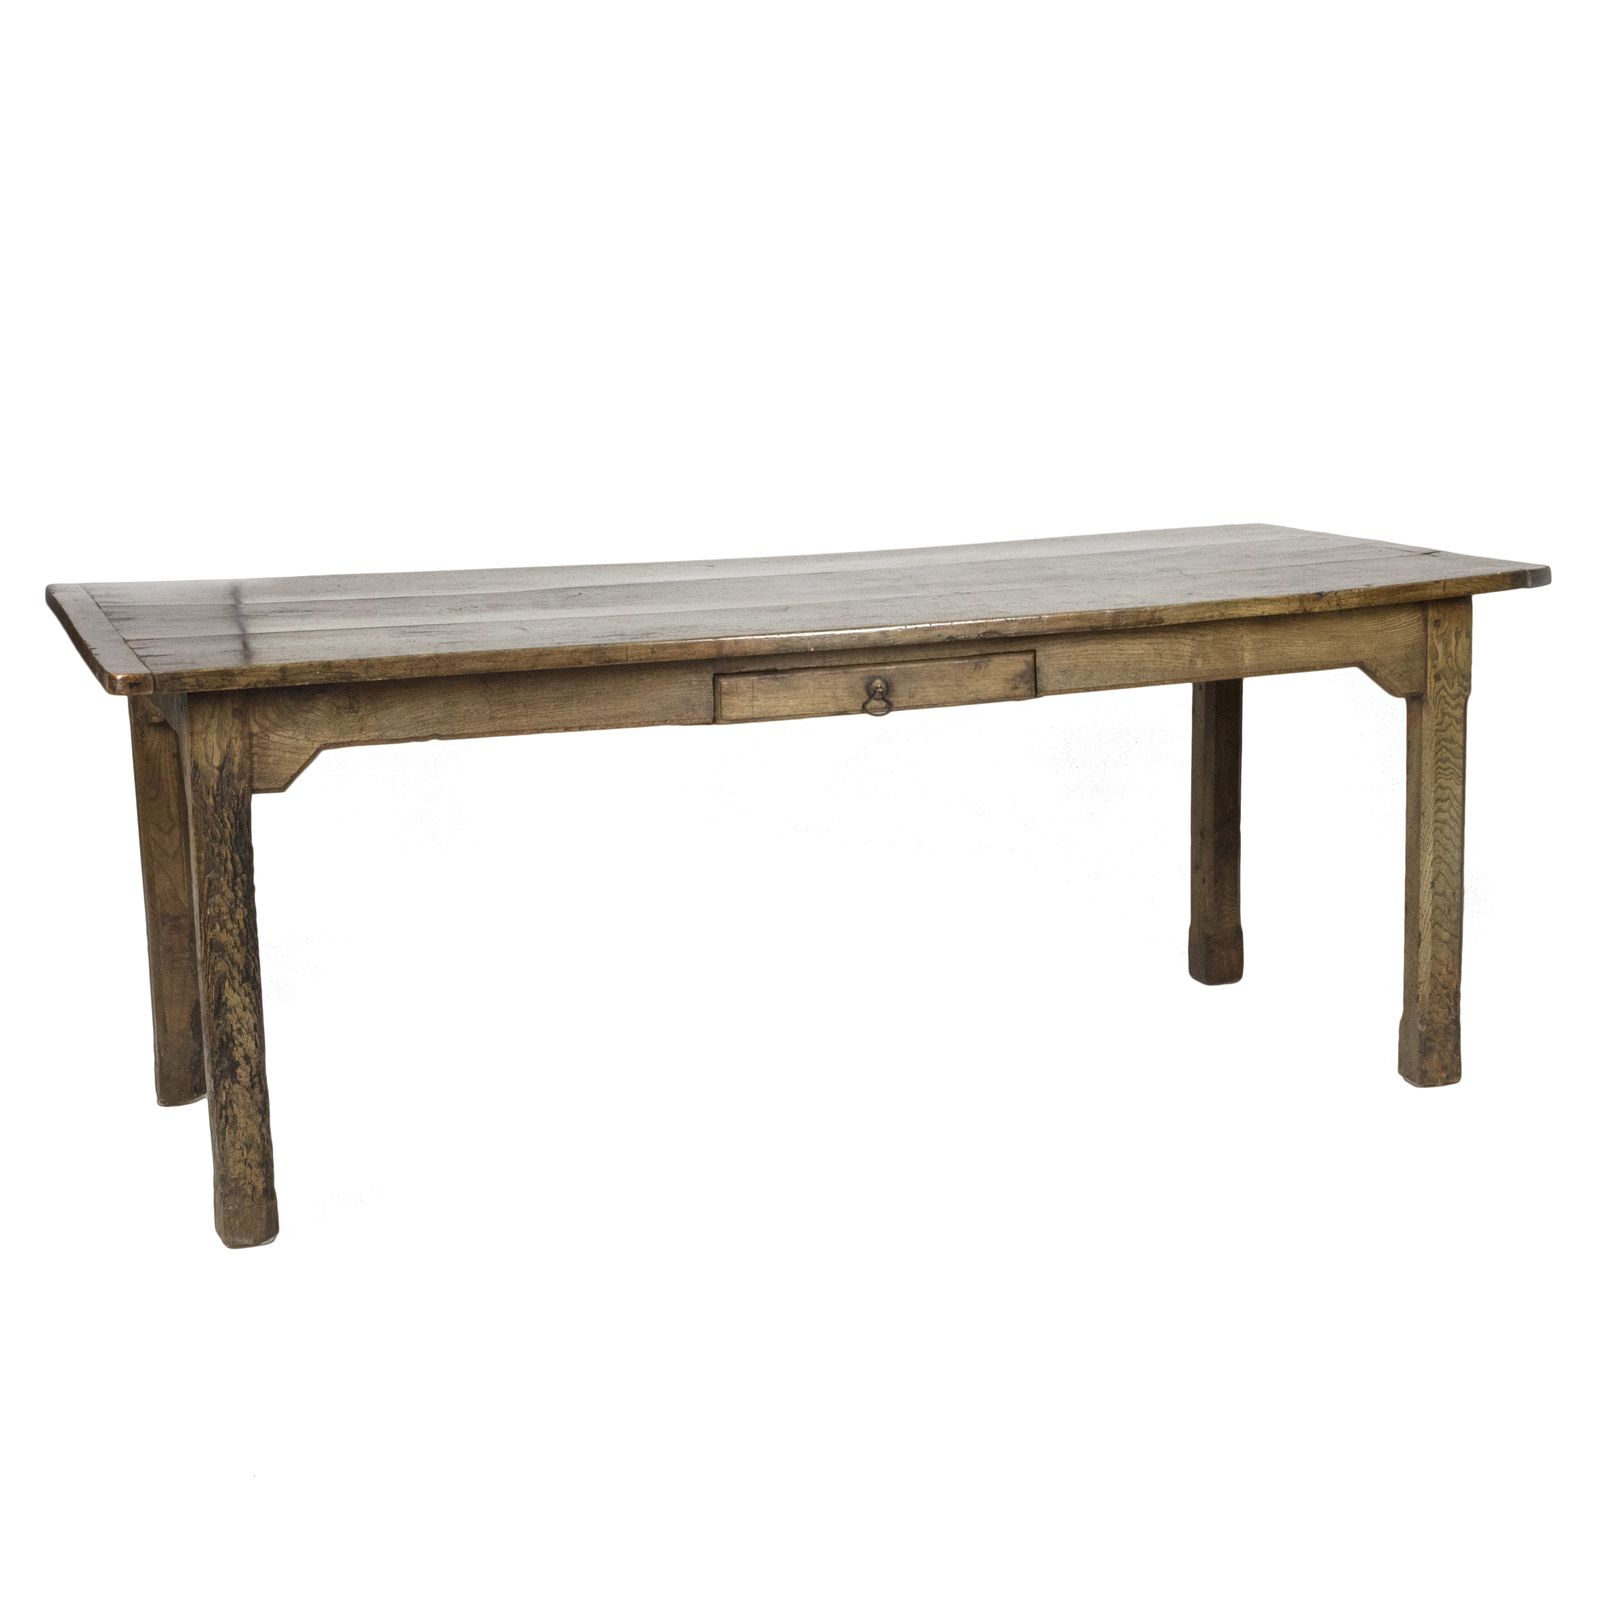 Reclaimed Fruitwood Outdoor Tables With 2019 Authentic English Country Farm Table, 19th Century (415) 355  (View 6 of 15)